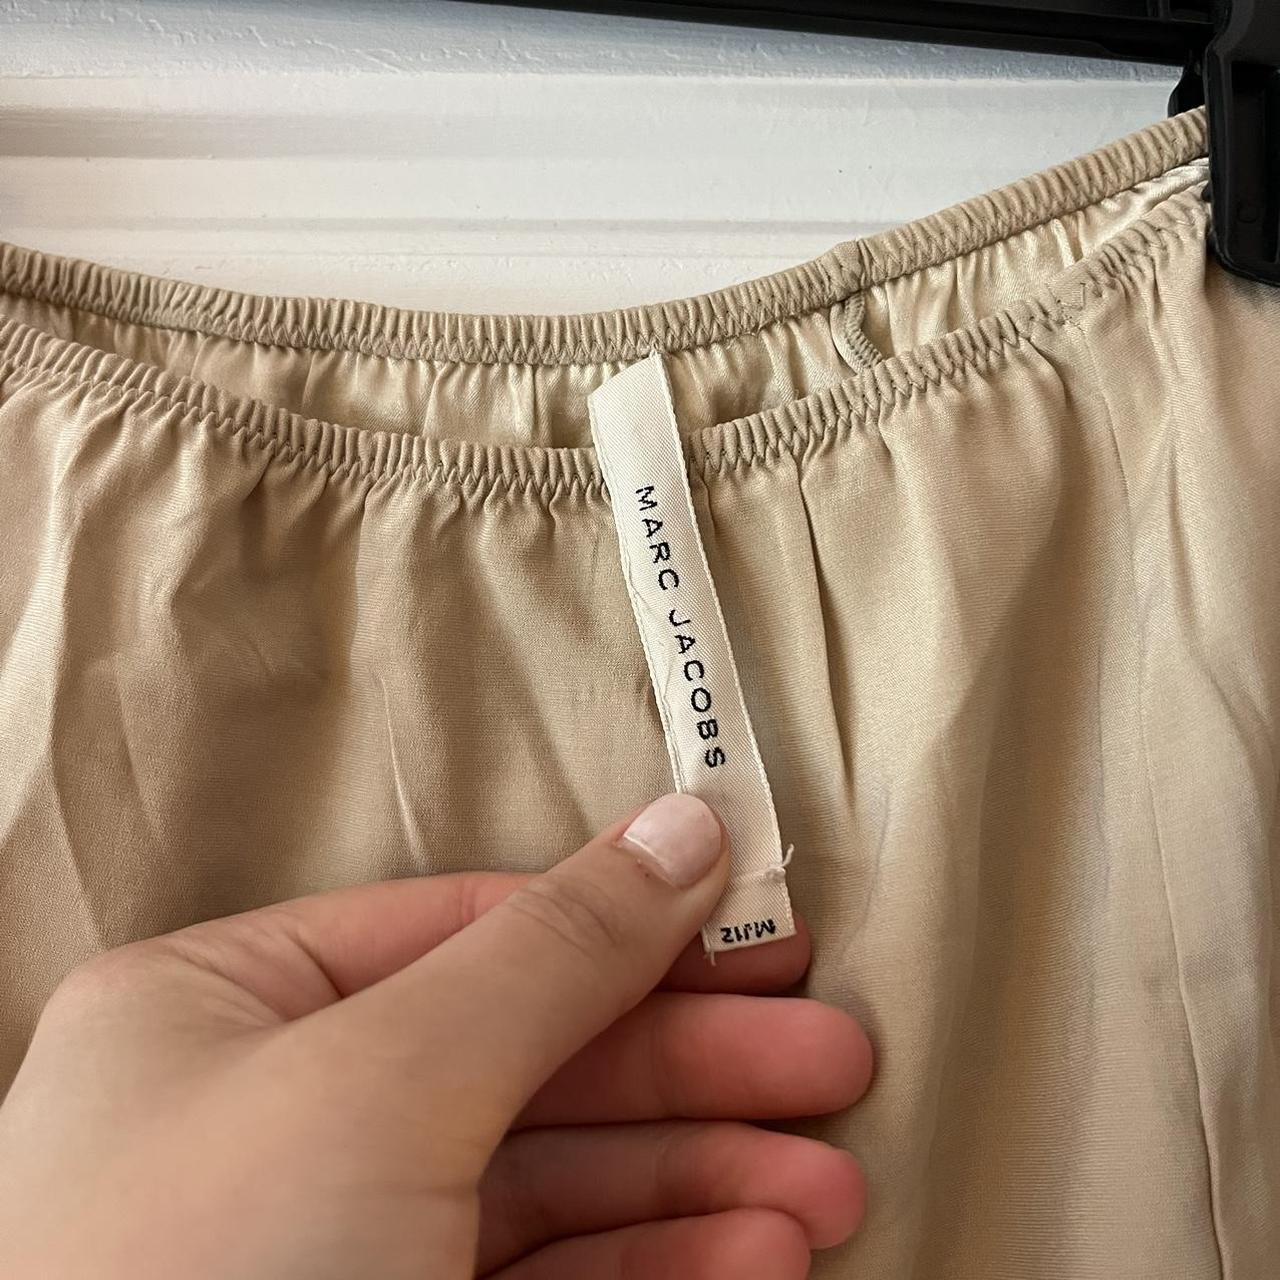 Marc Jacobs Women's Tan and Grey Skirt (5)